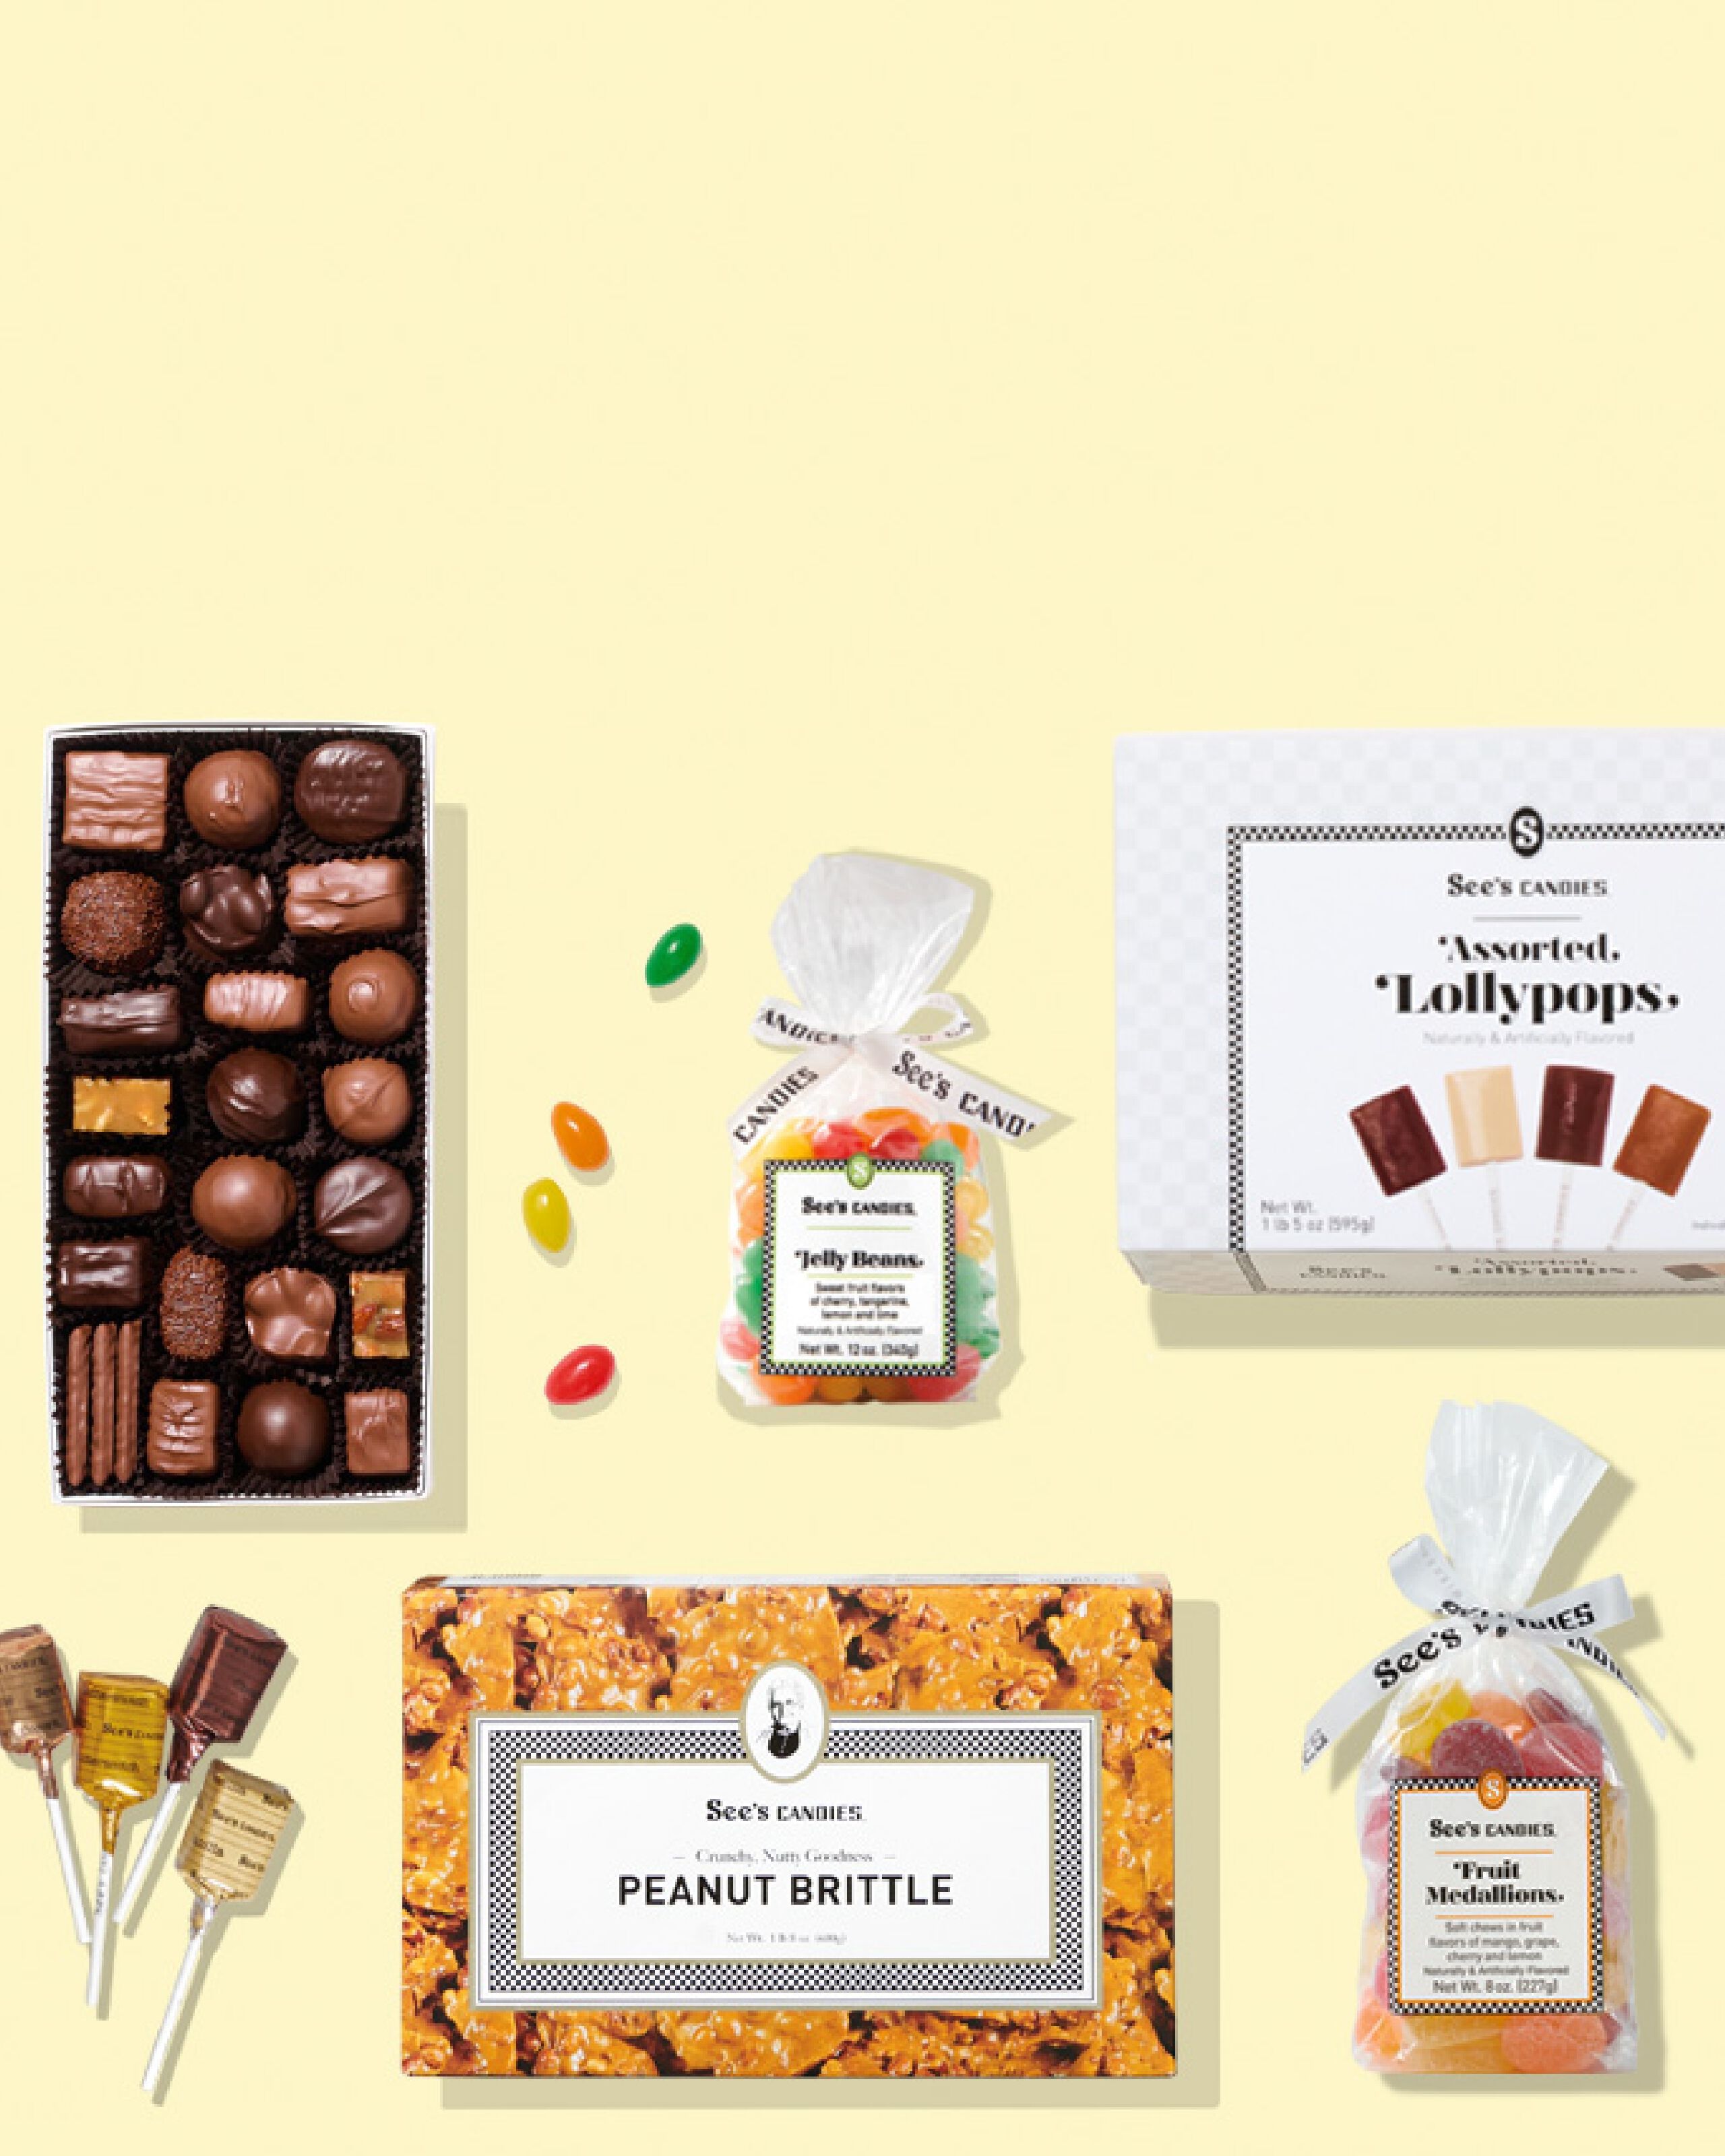 A spread of See's candies